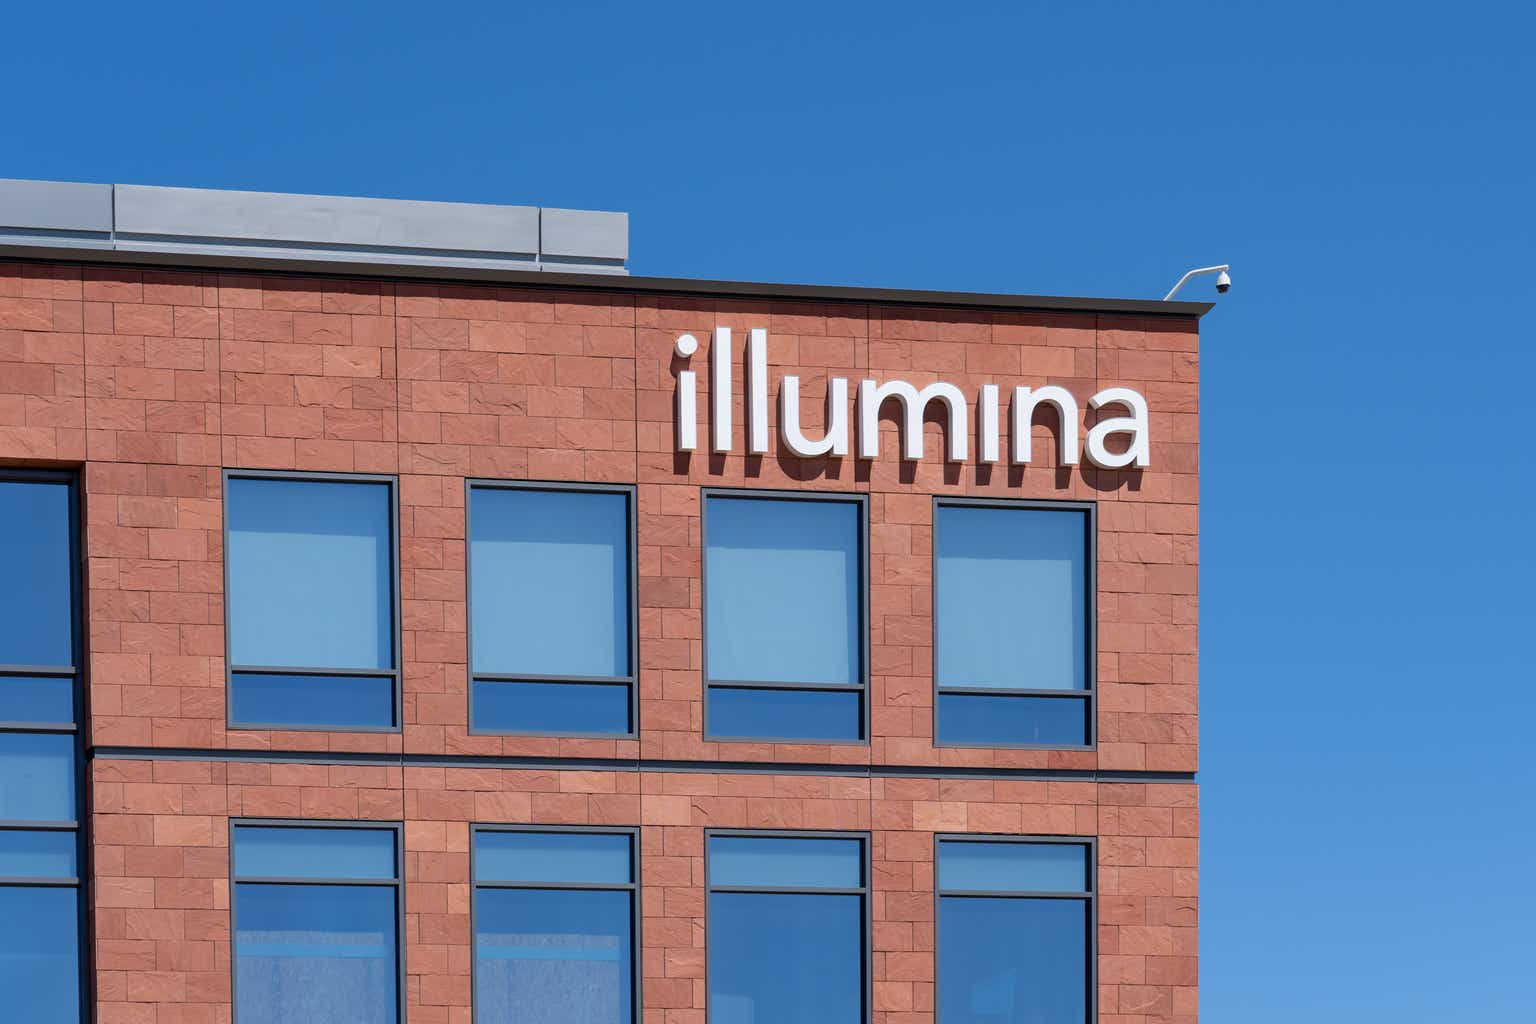 The Market Continues To Underprice Illumina''s Stock And Its Genomics Leadership